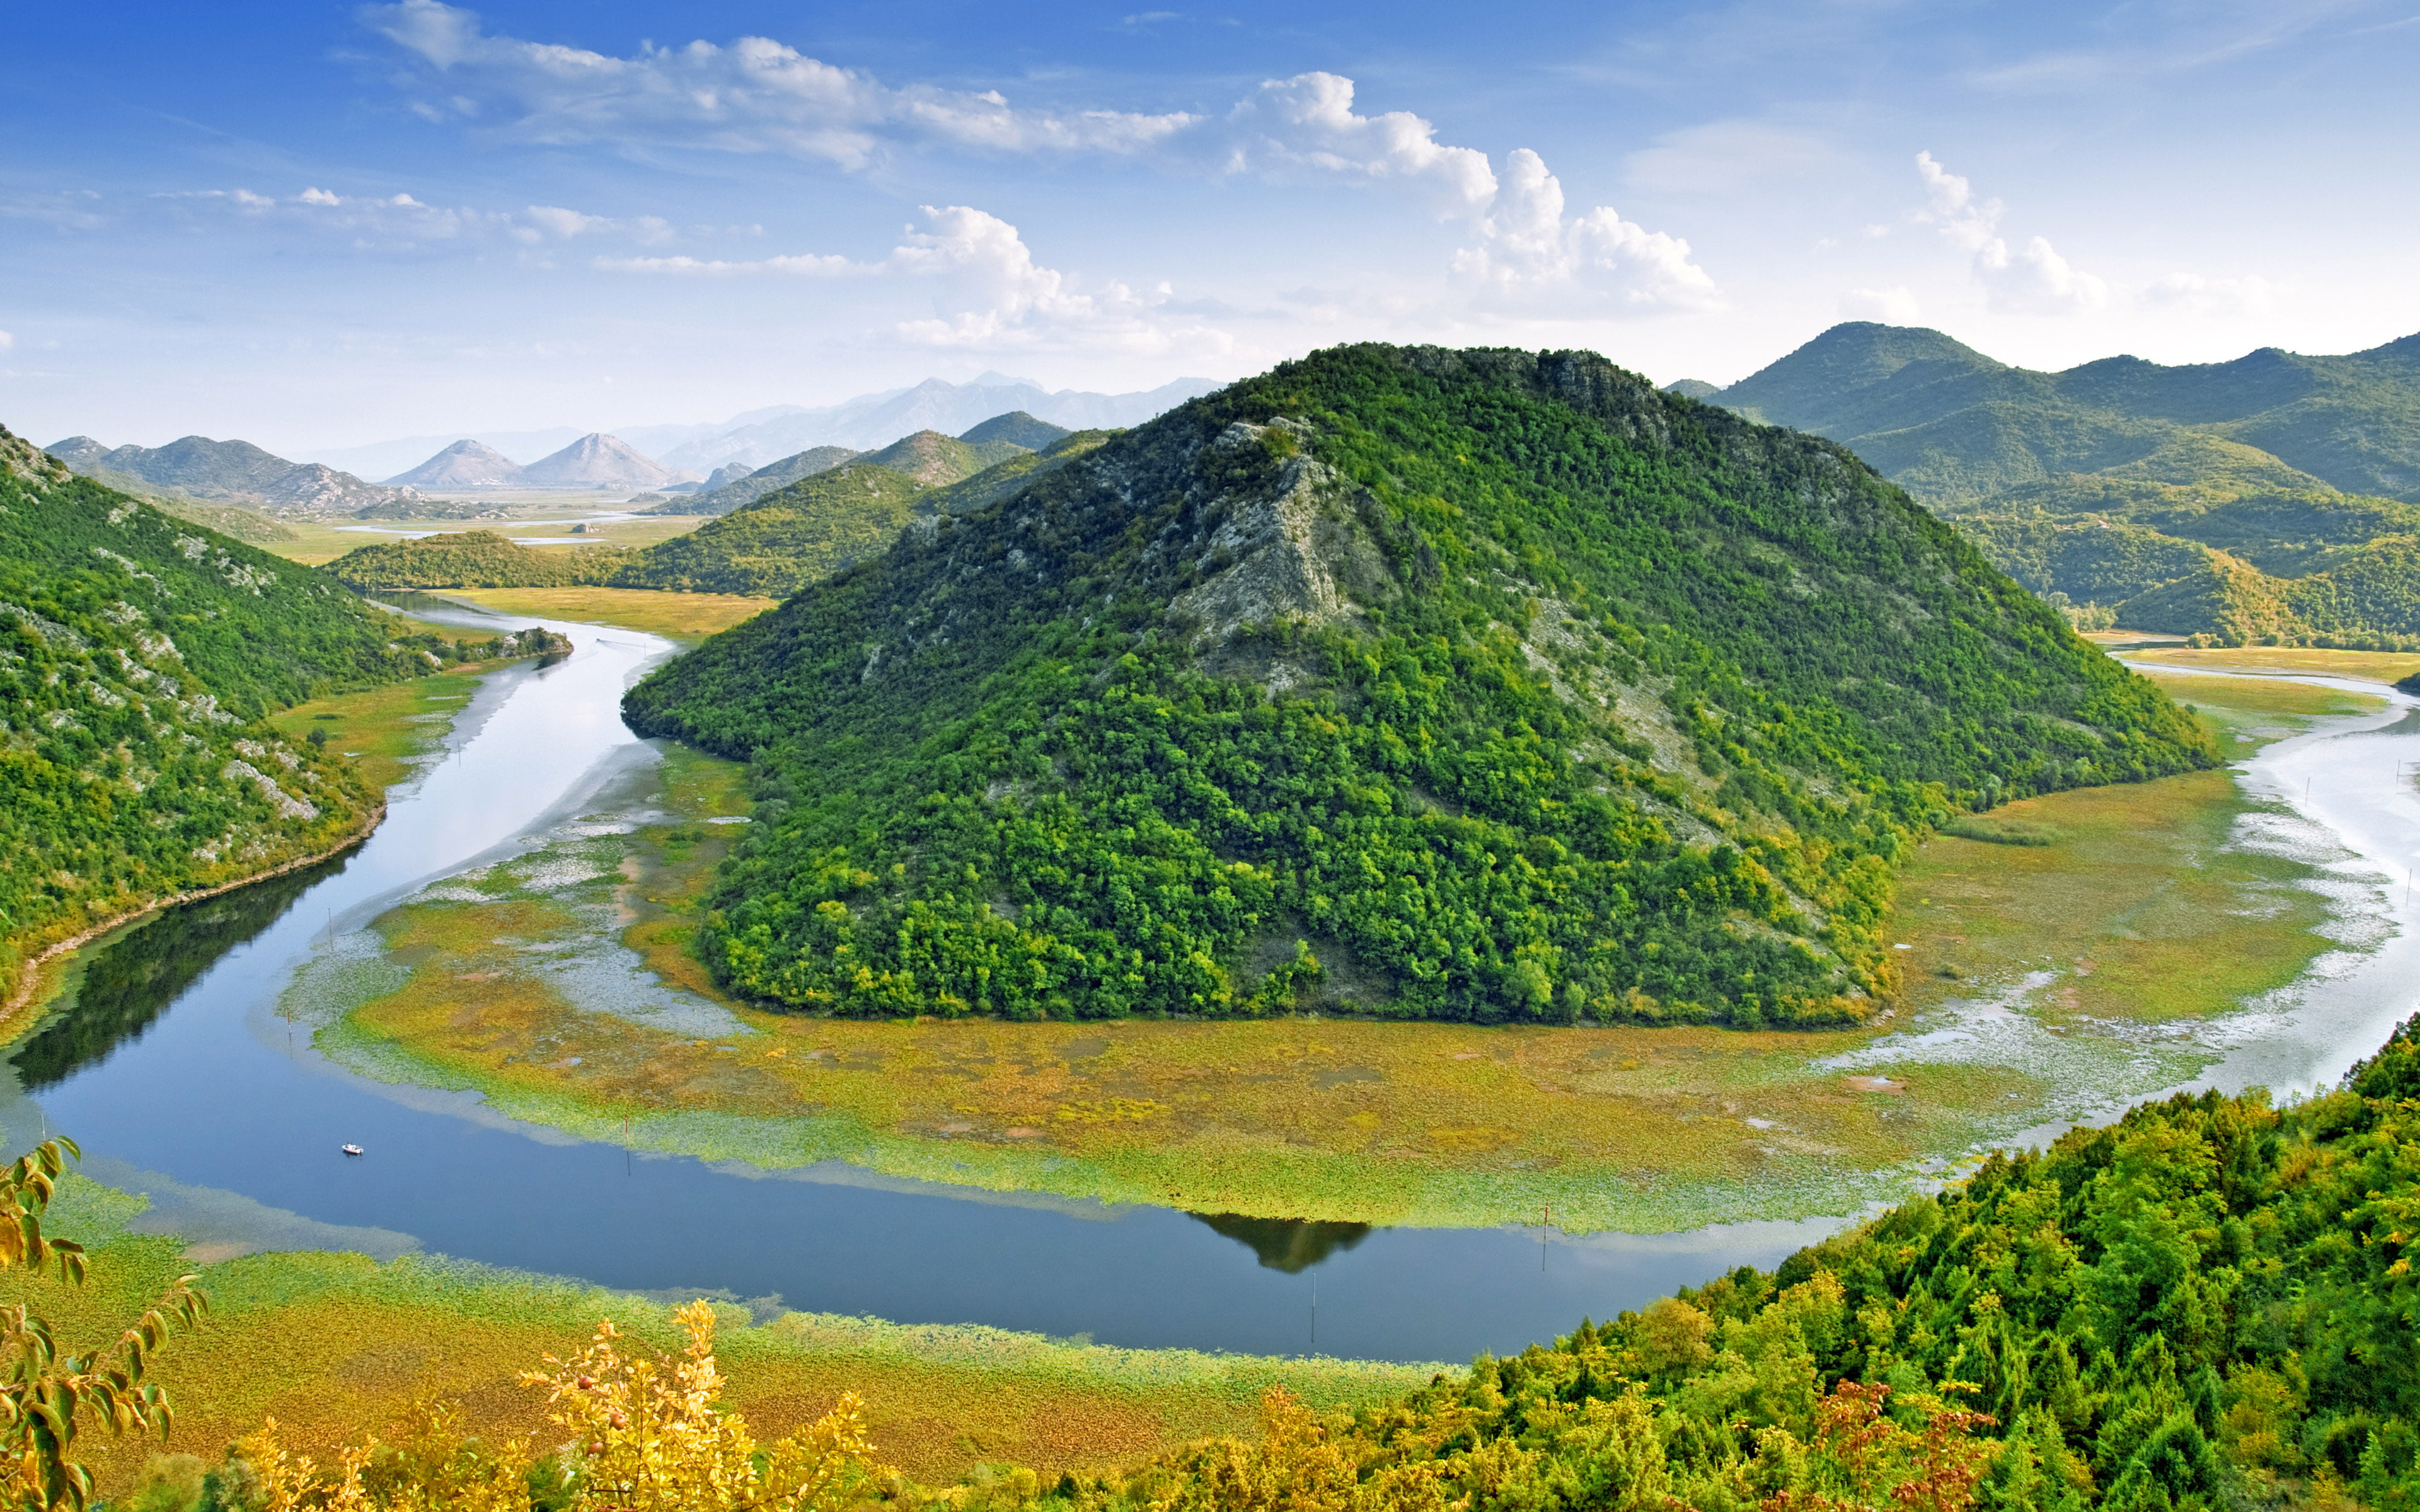 The Black Sea River Is Located In The Municipality Of Cetinje In Montenegro With A Length Of 12.3 Km Desktop Hd Wallpapers For Mobile Phones And Computer 3840×2400